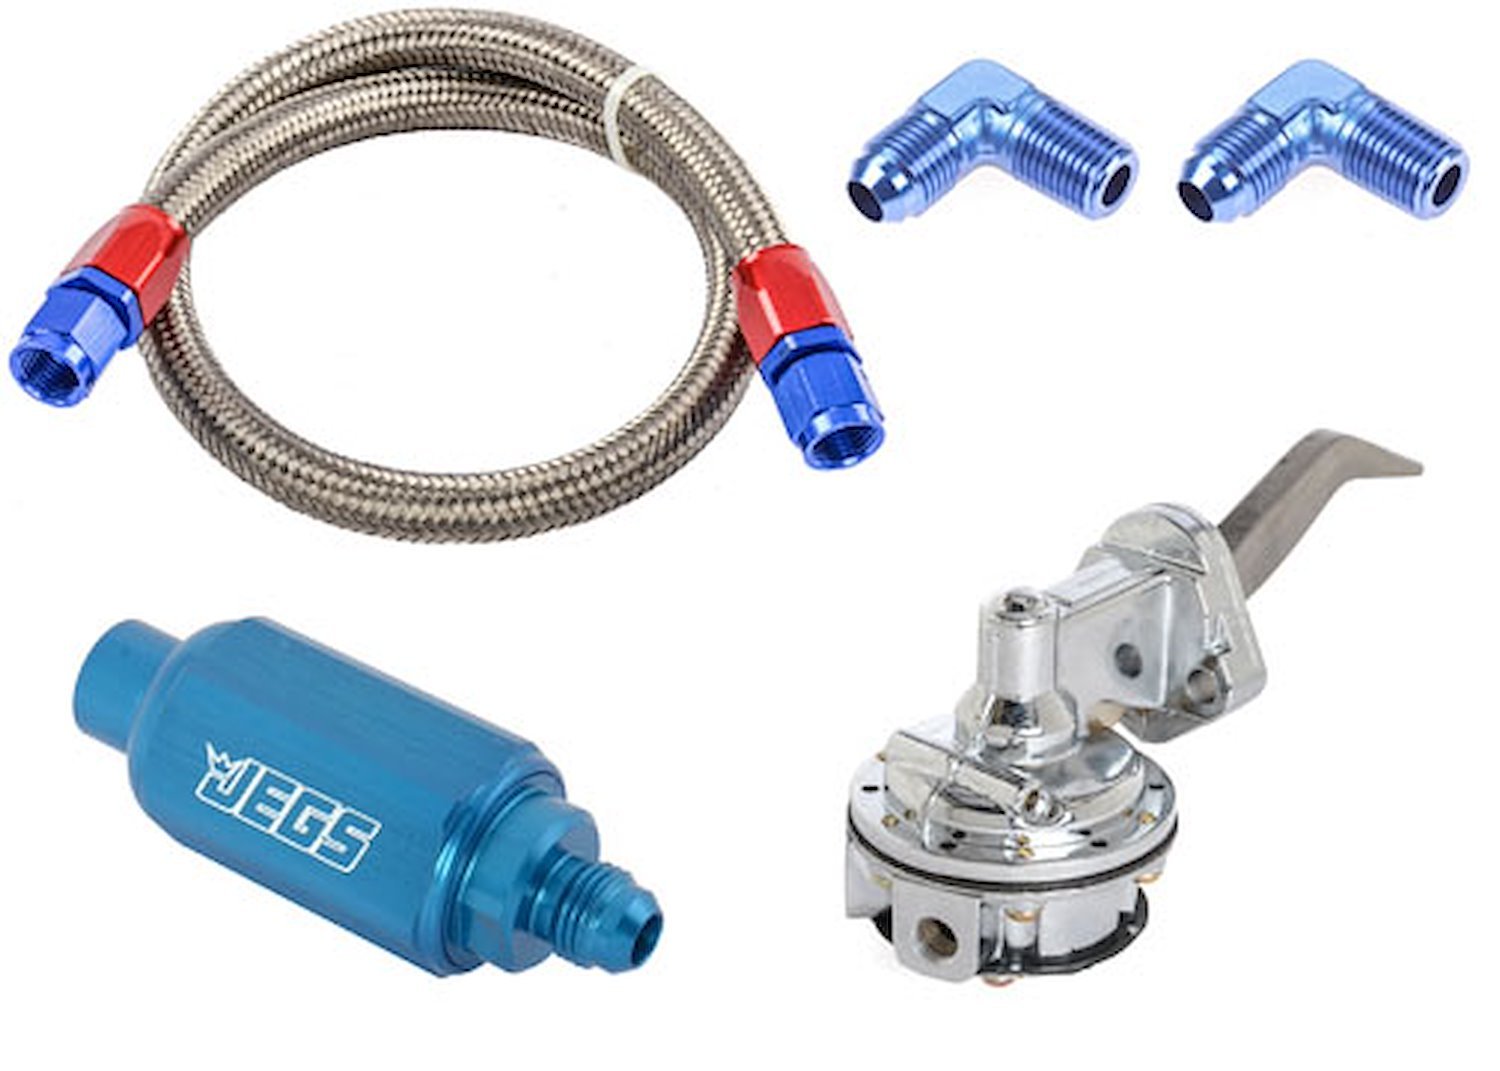 Mechanical Fuel Pump & Installation Kit for Ford 289-302-351W [80 gph, Blue Fittings]